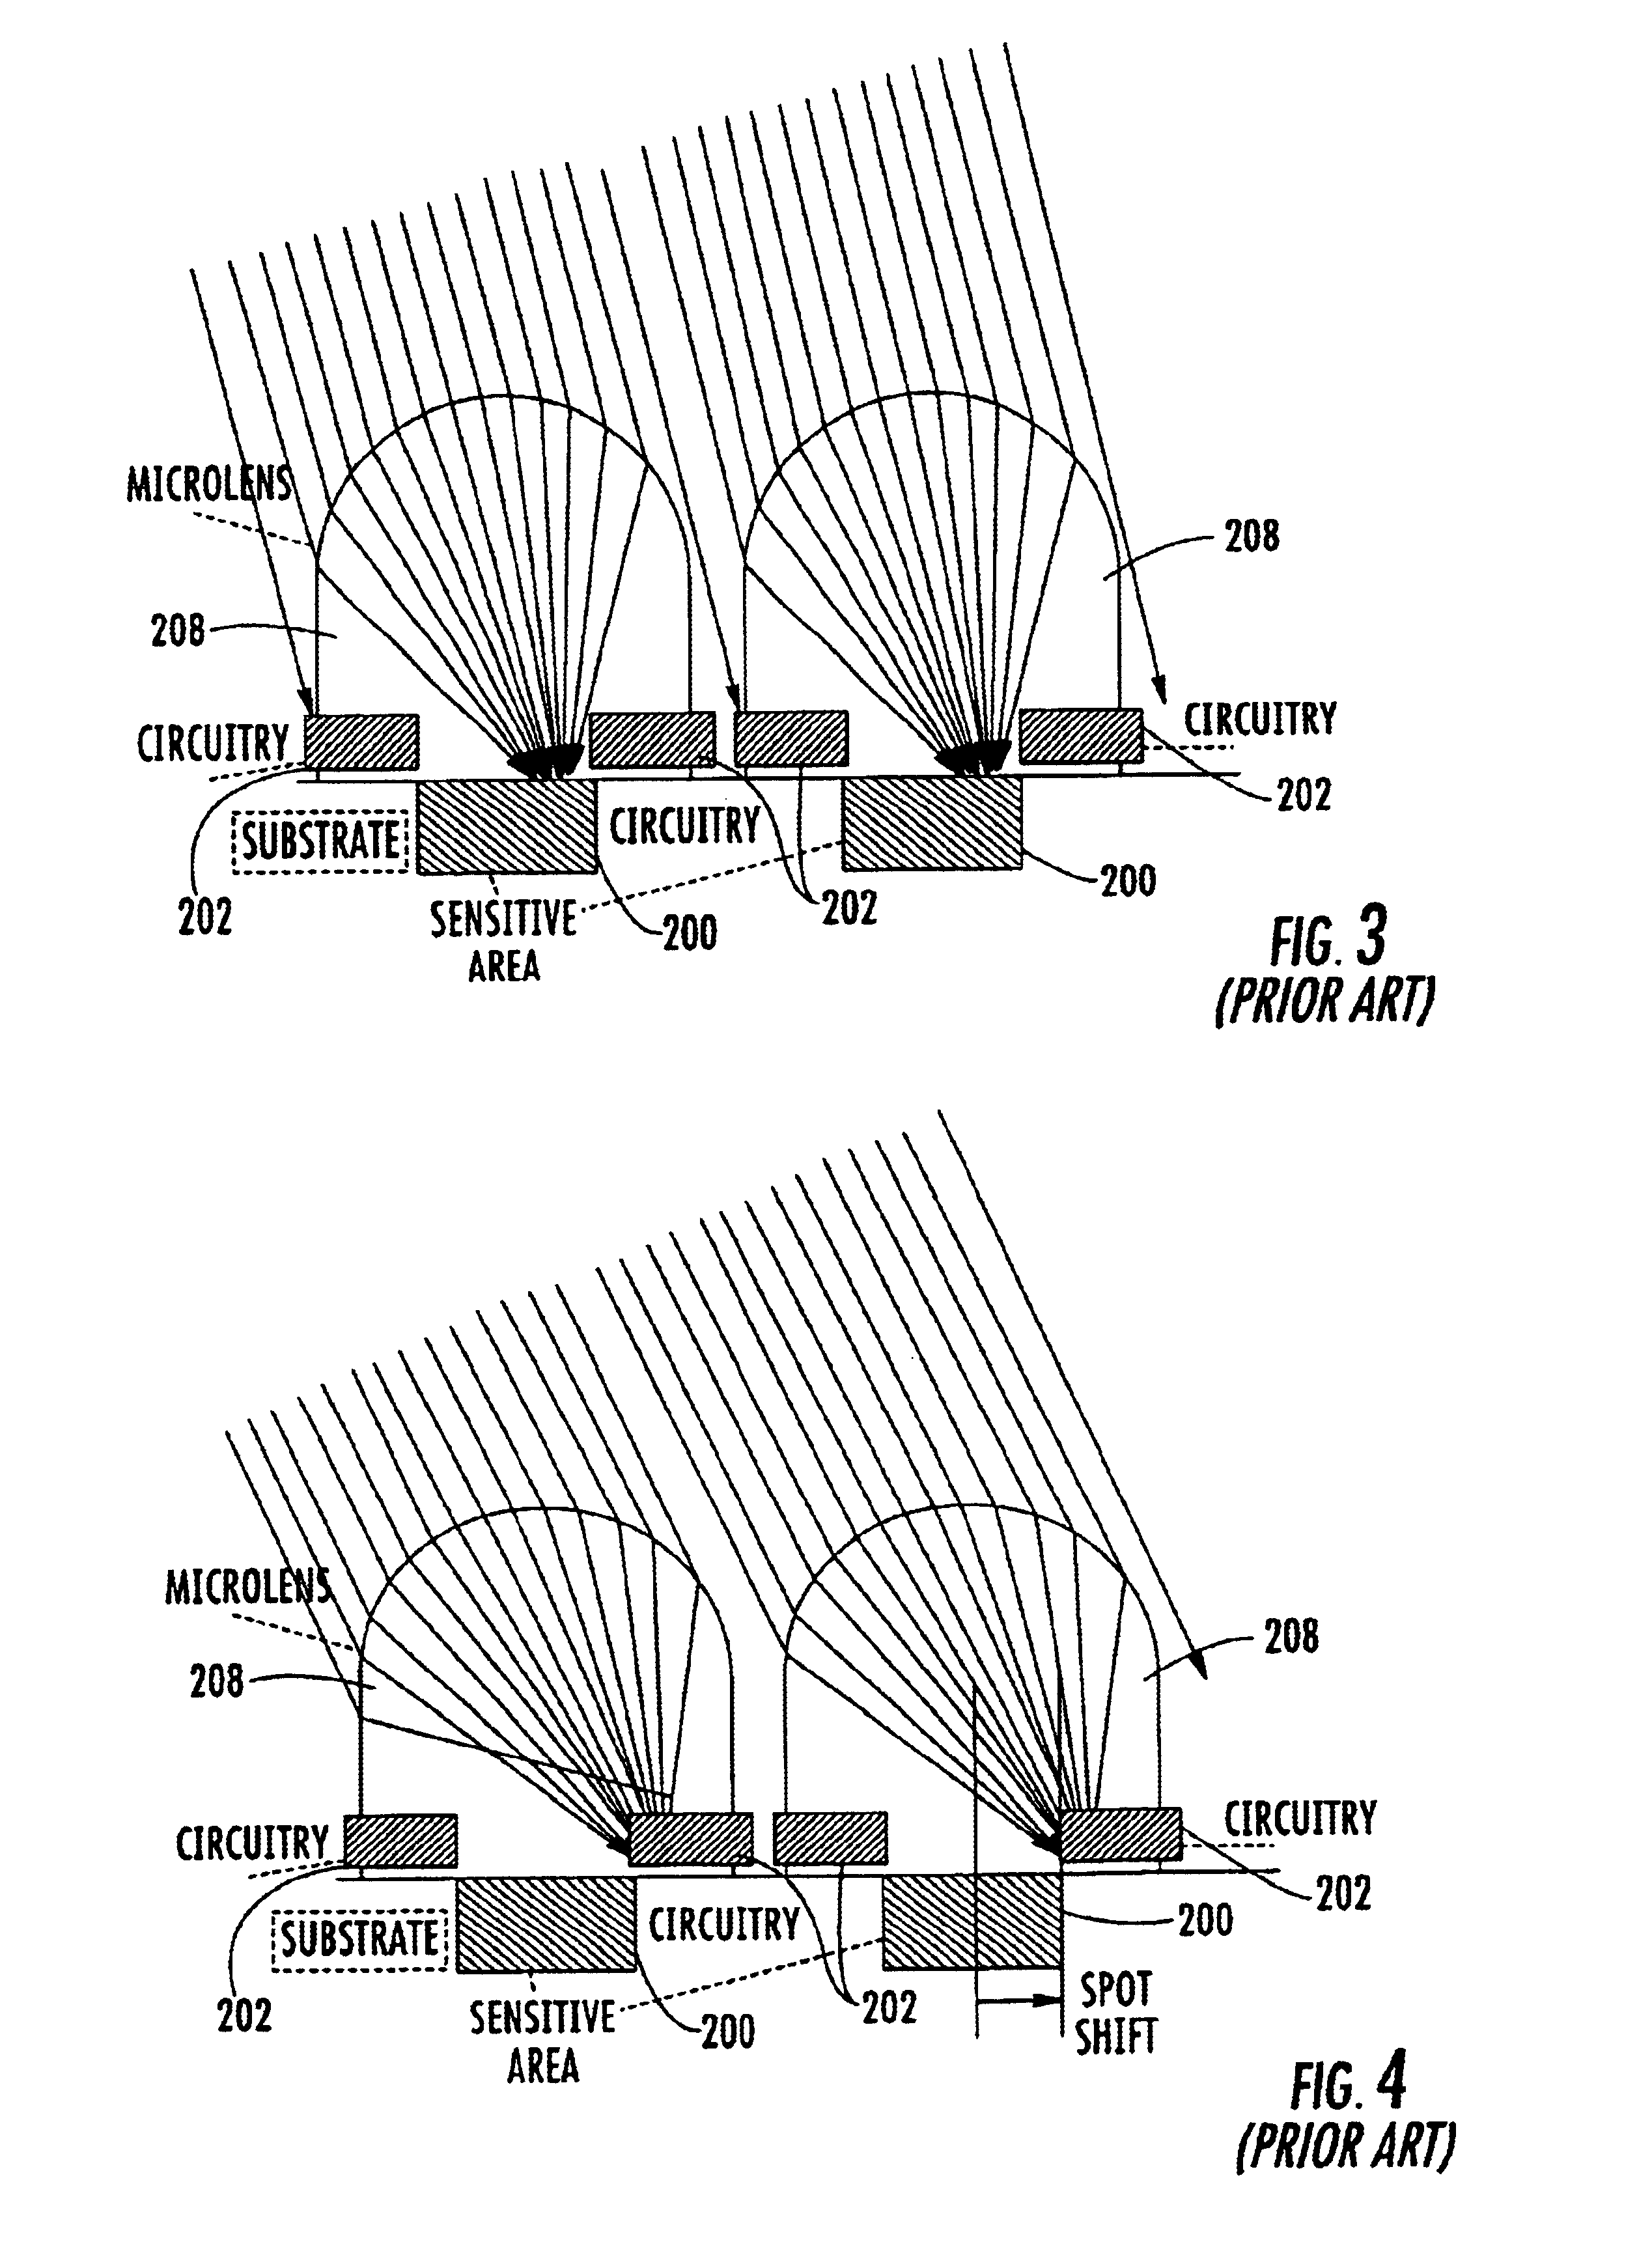 Solid state image sensors and microlens arrays